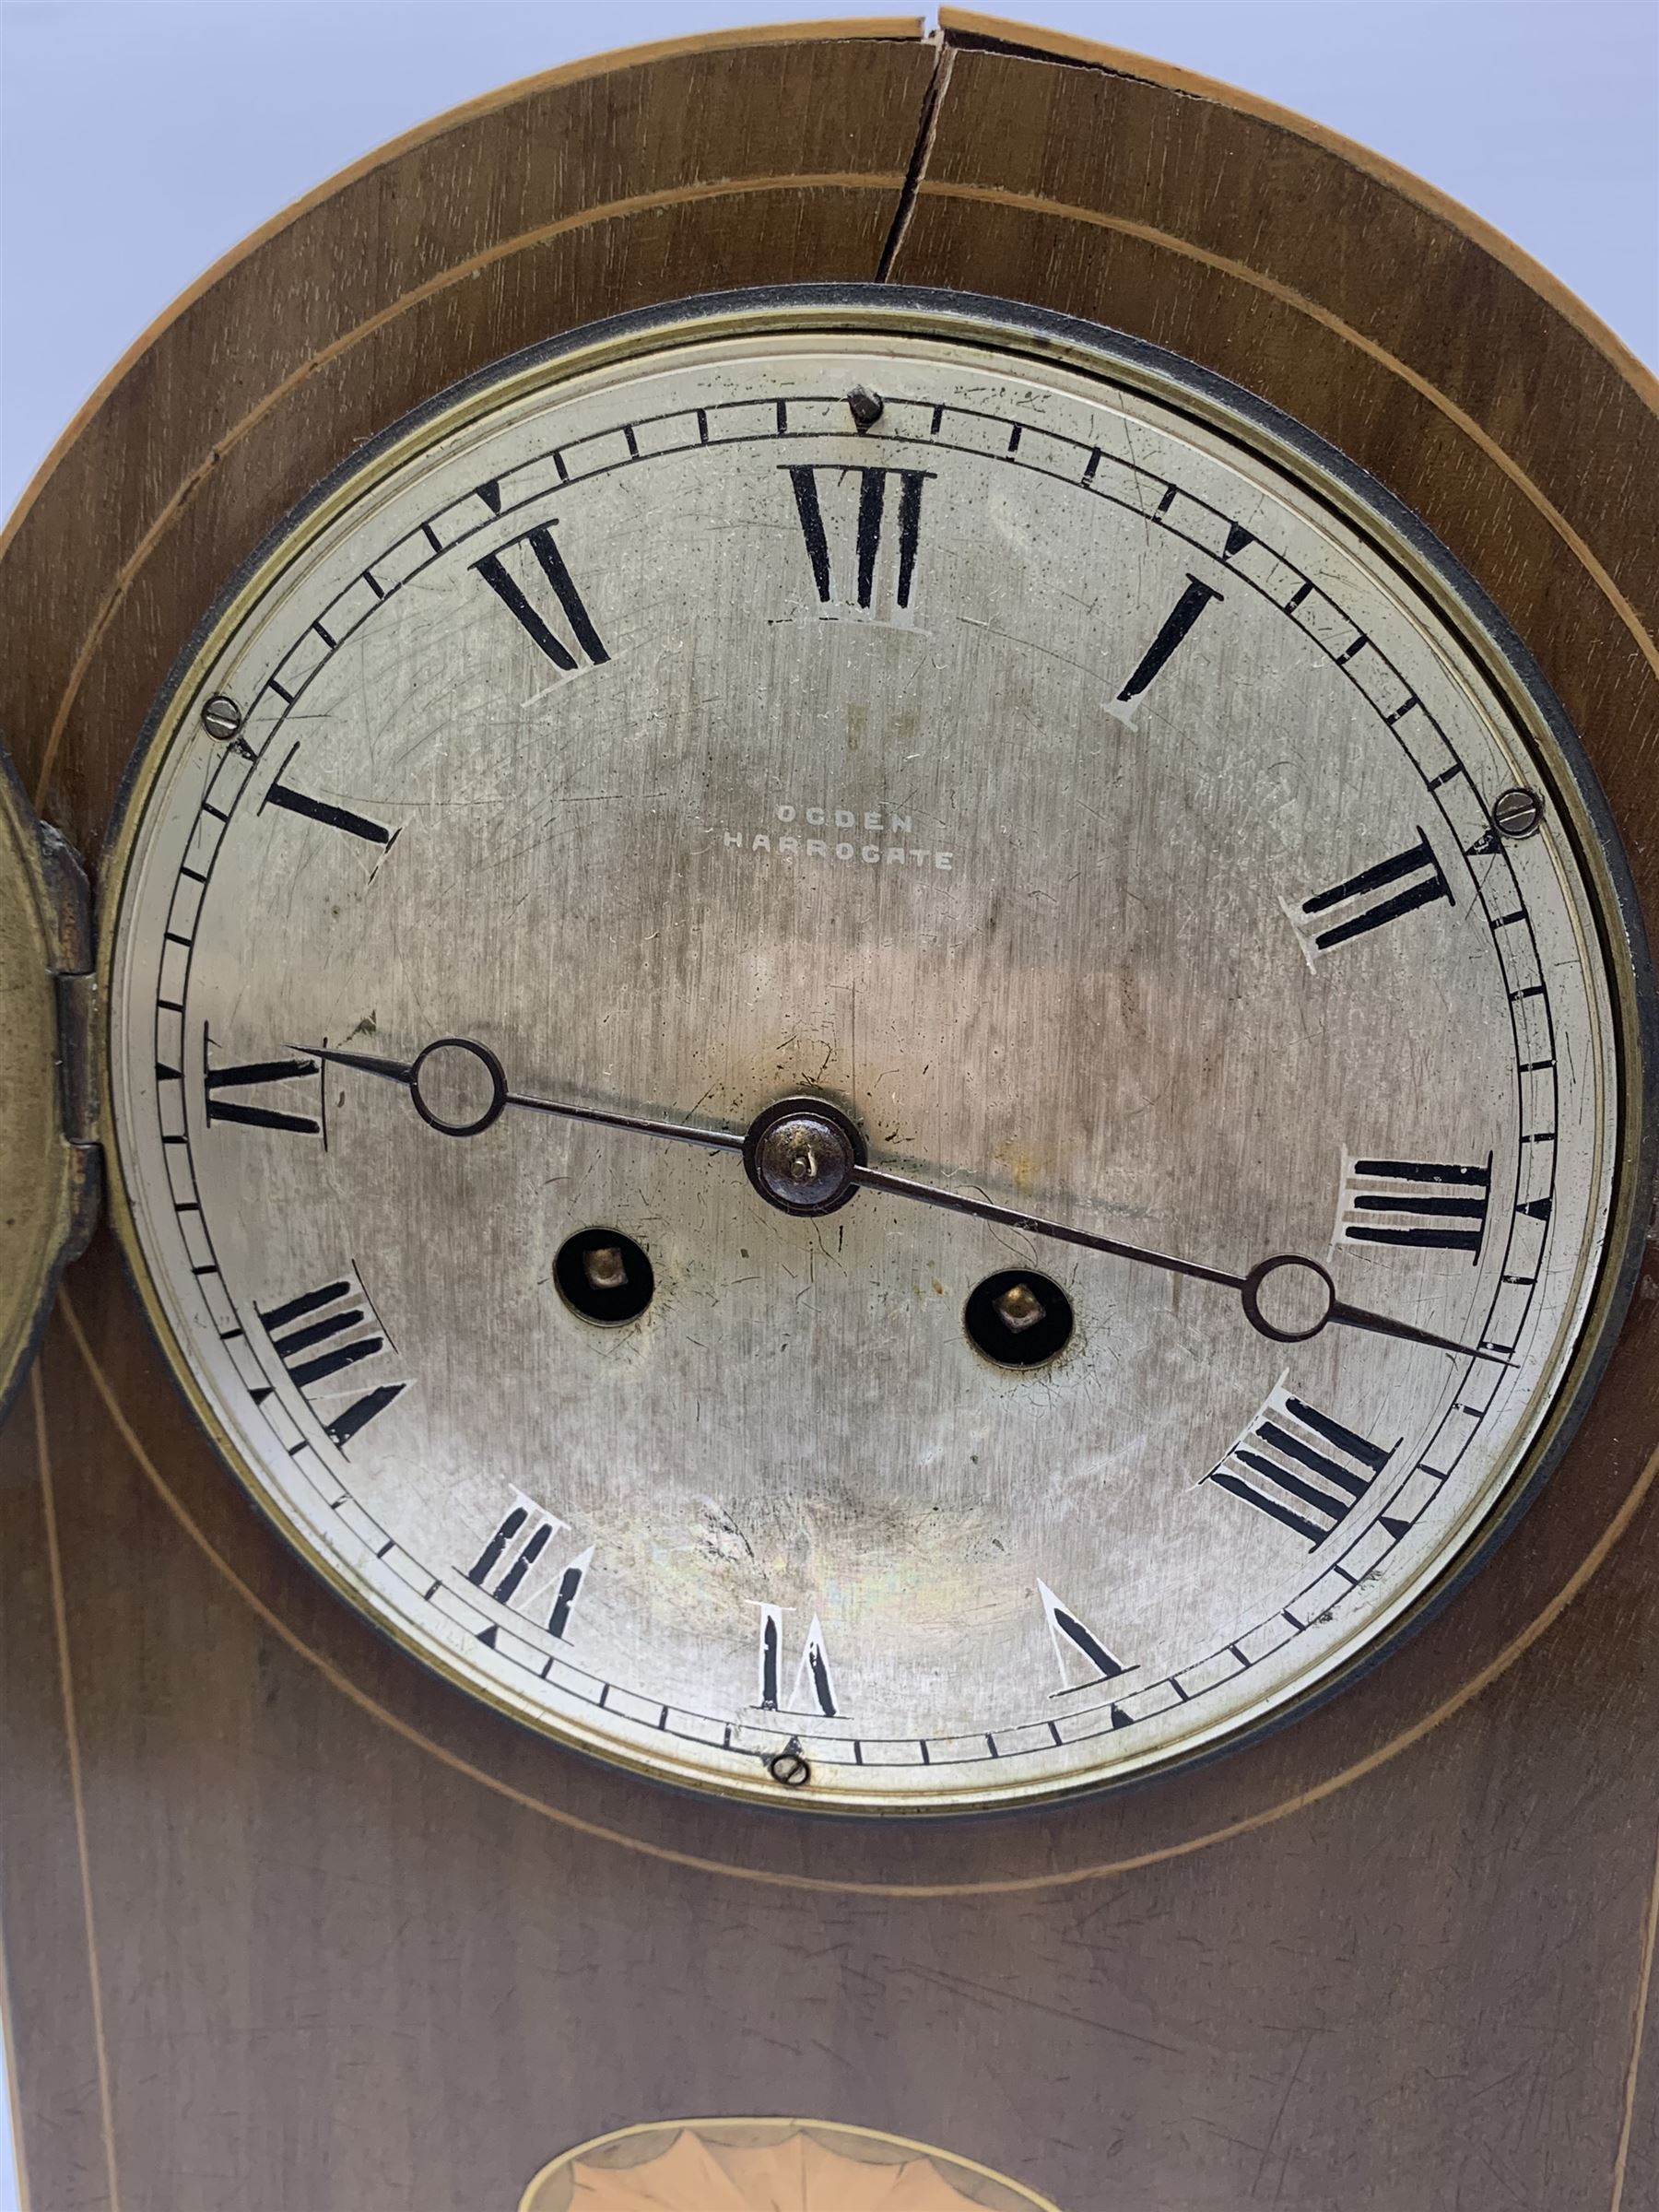 Ogden of Harrogate walnut cased mantel clock with silvered roman dial - Image 5 of 6